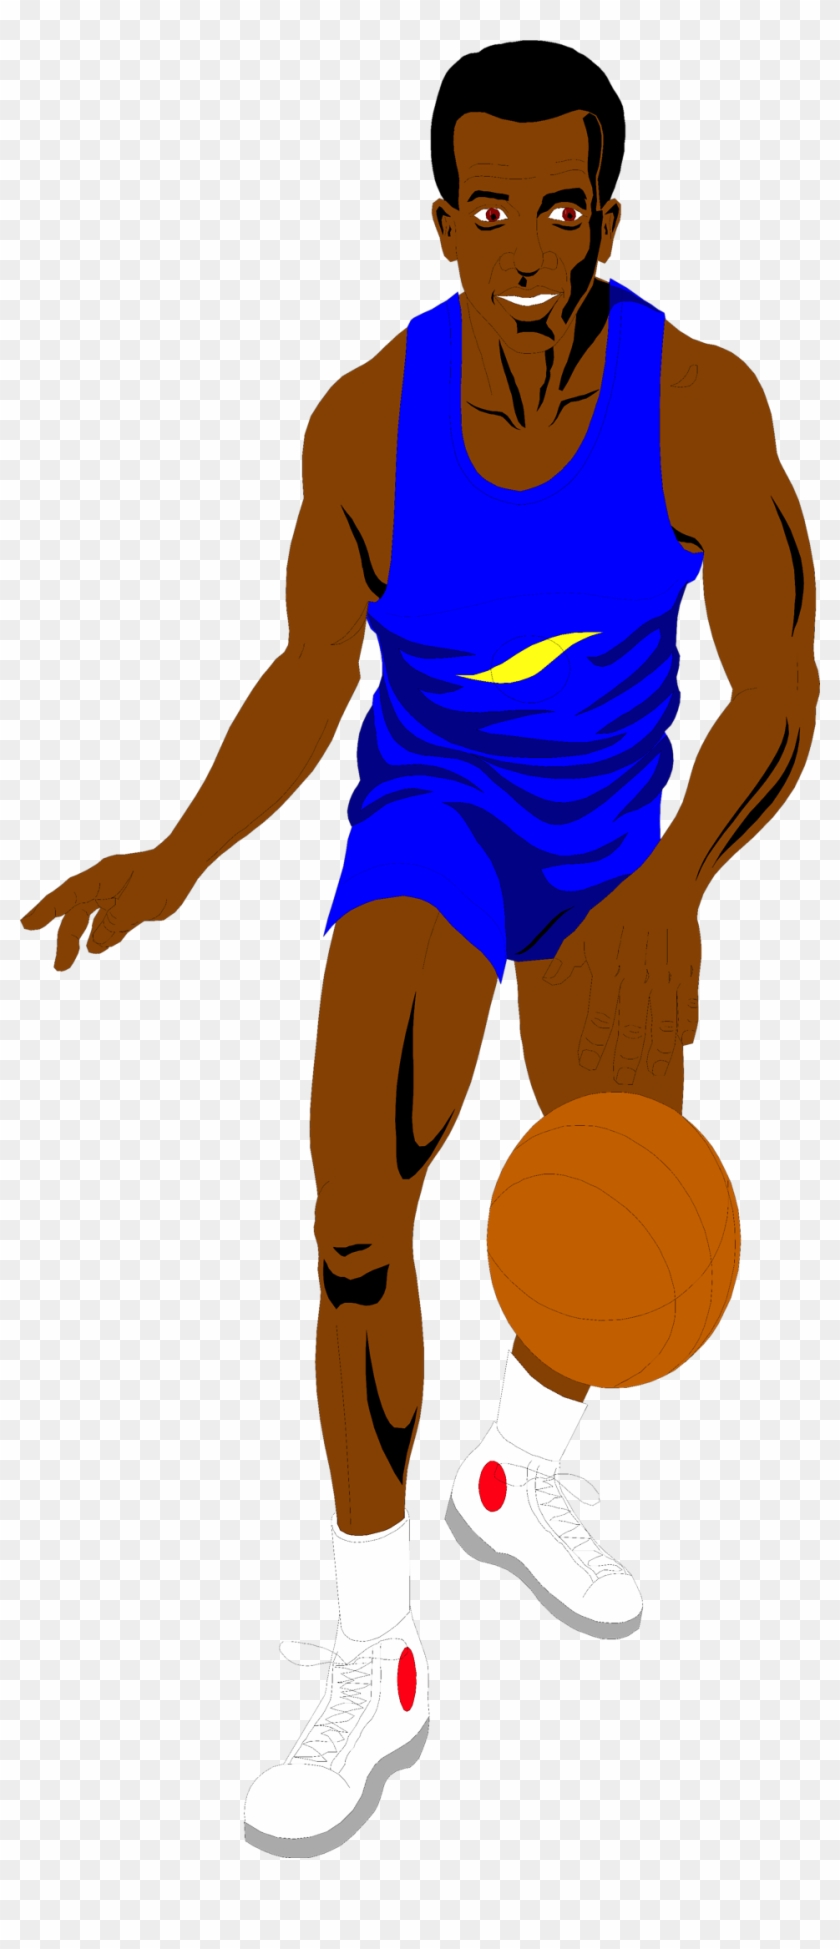 Free Stock Photo - Basketball No Background Clipart - Png Download #869762